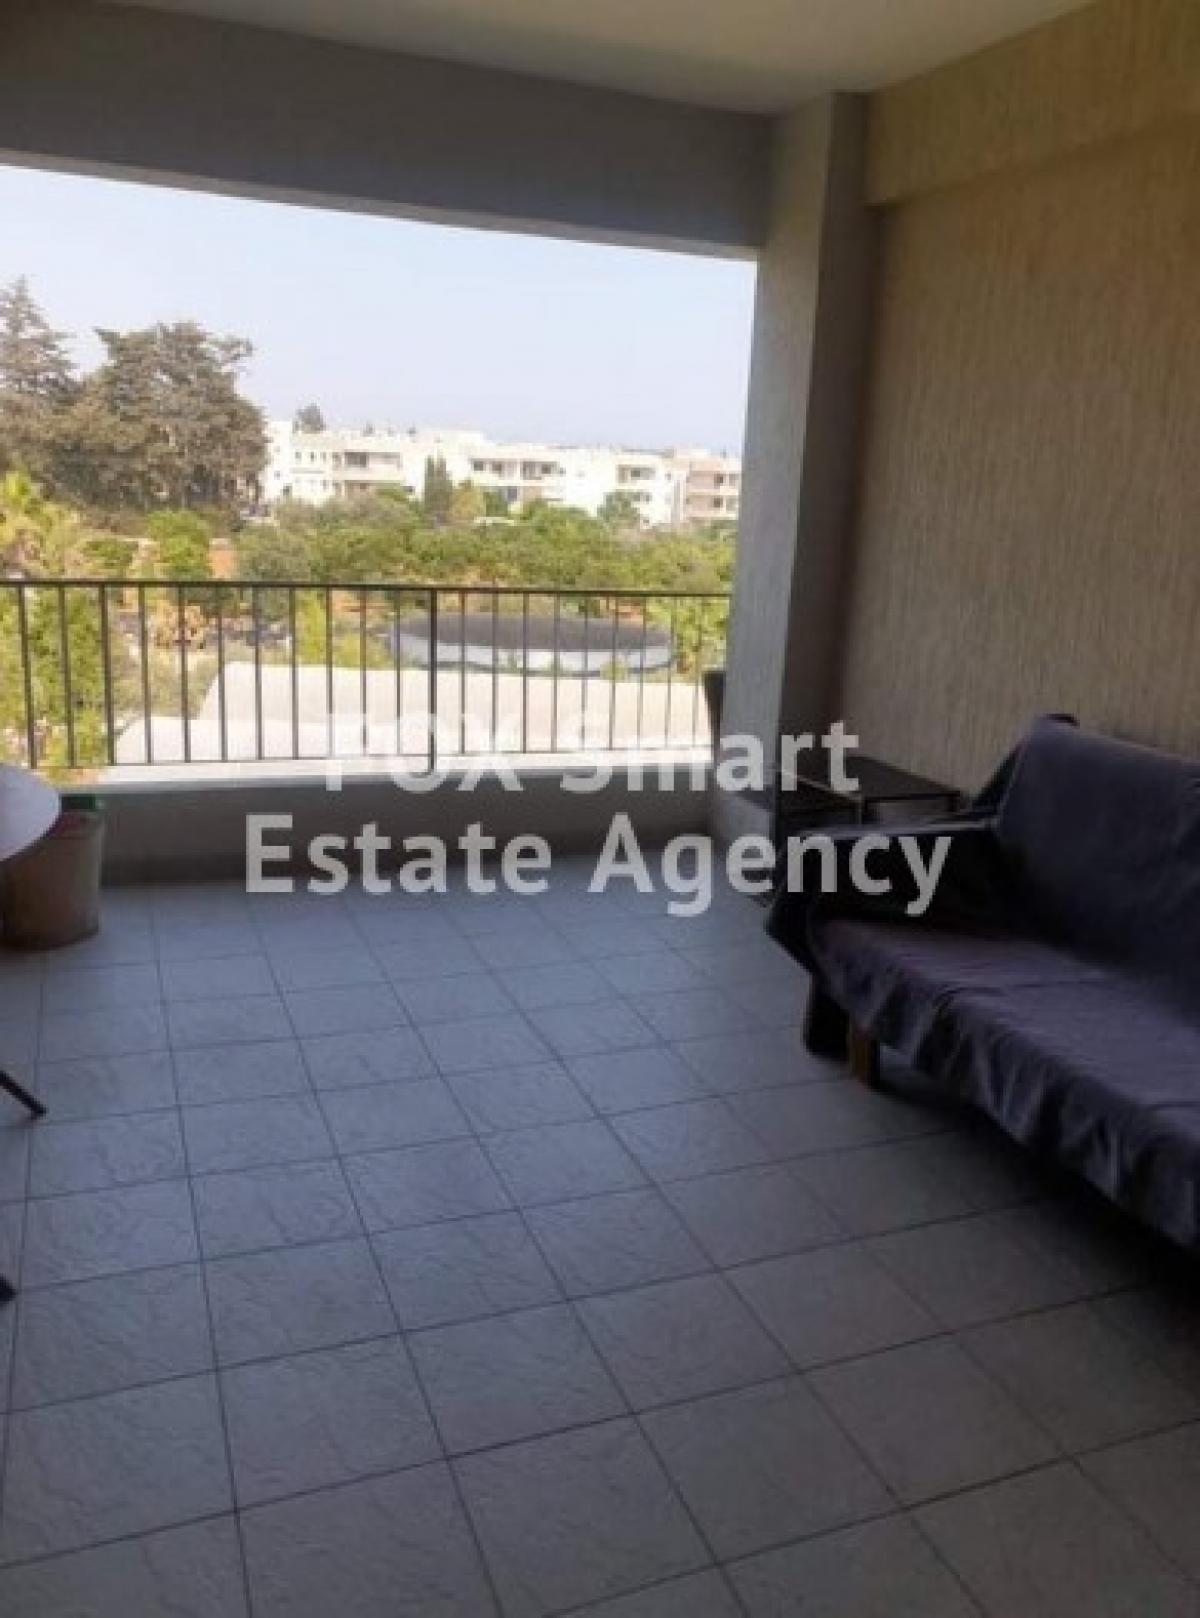 Picture of Apartment For Sale in Asomatos, Limassol, Cyprus